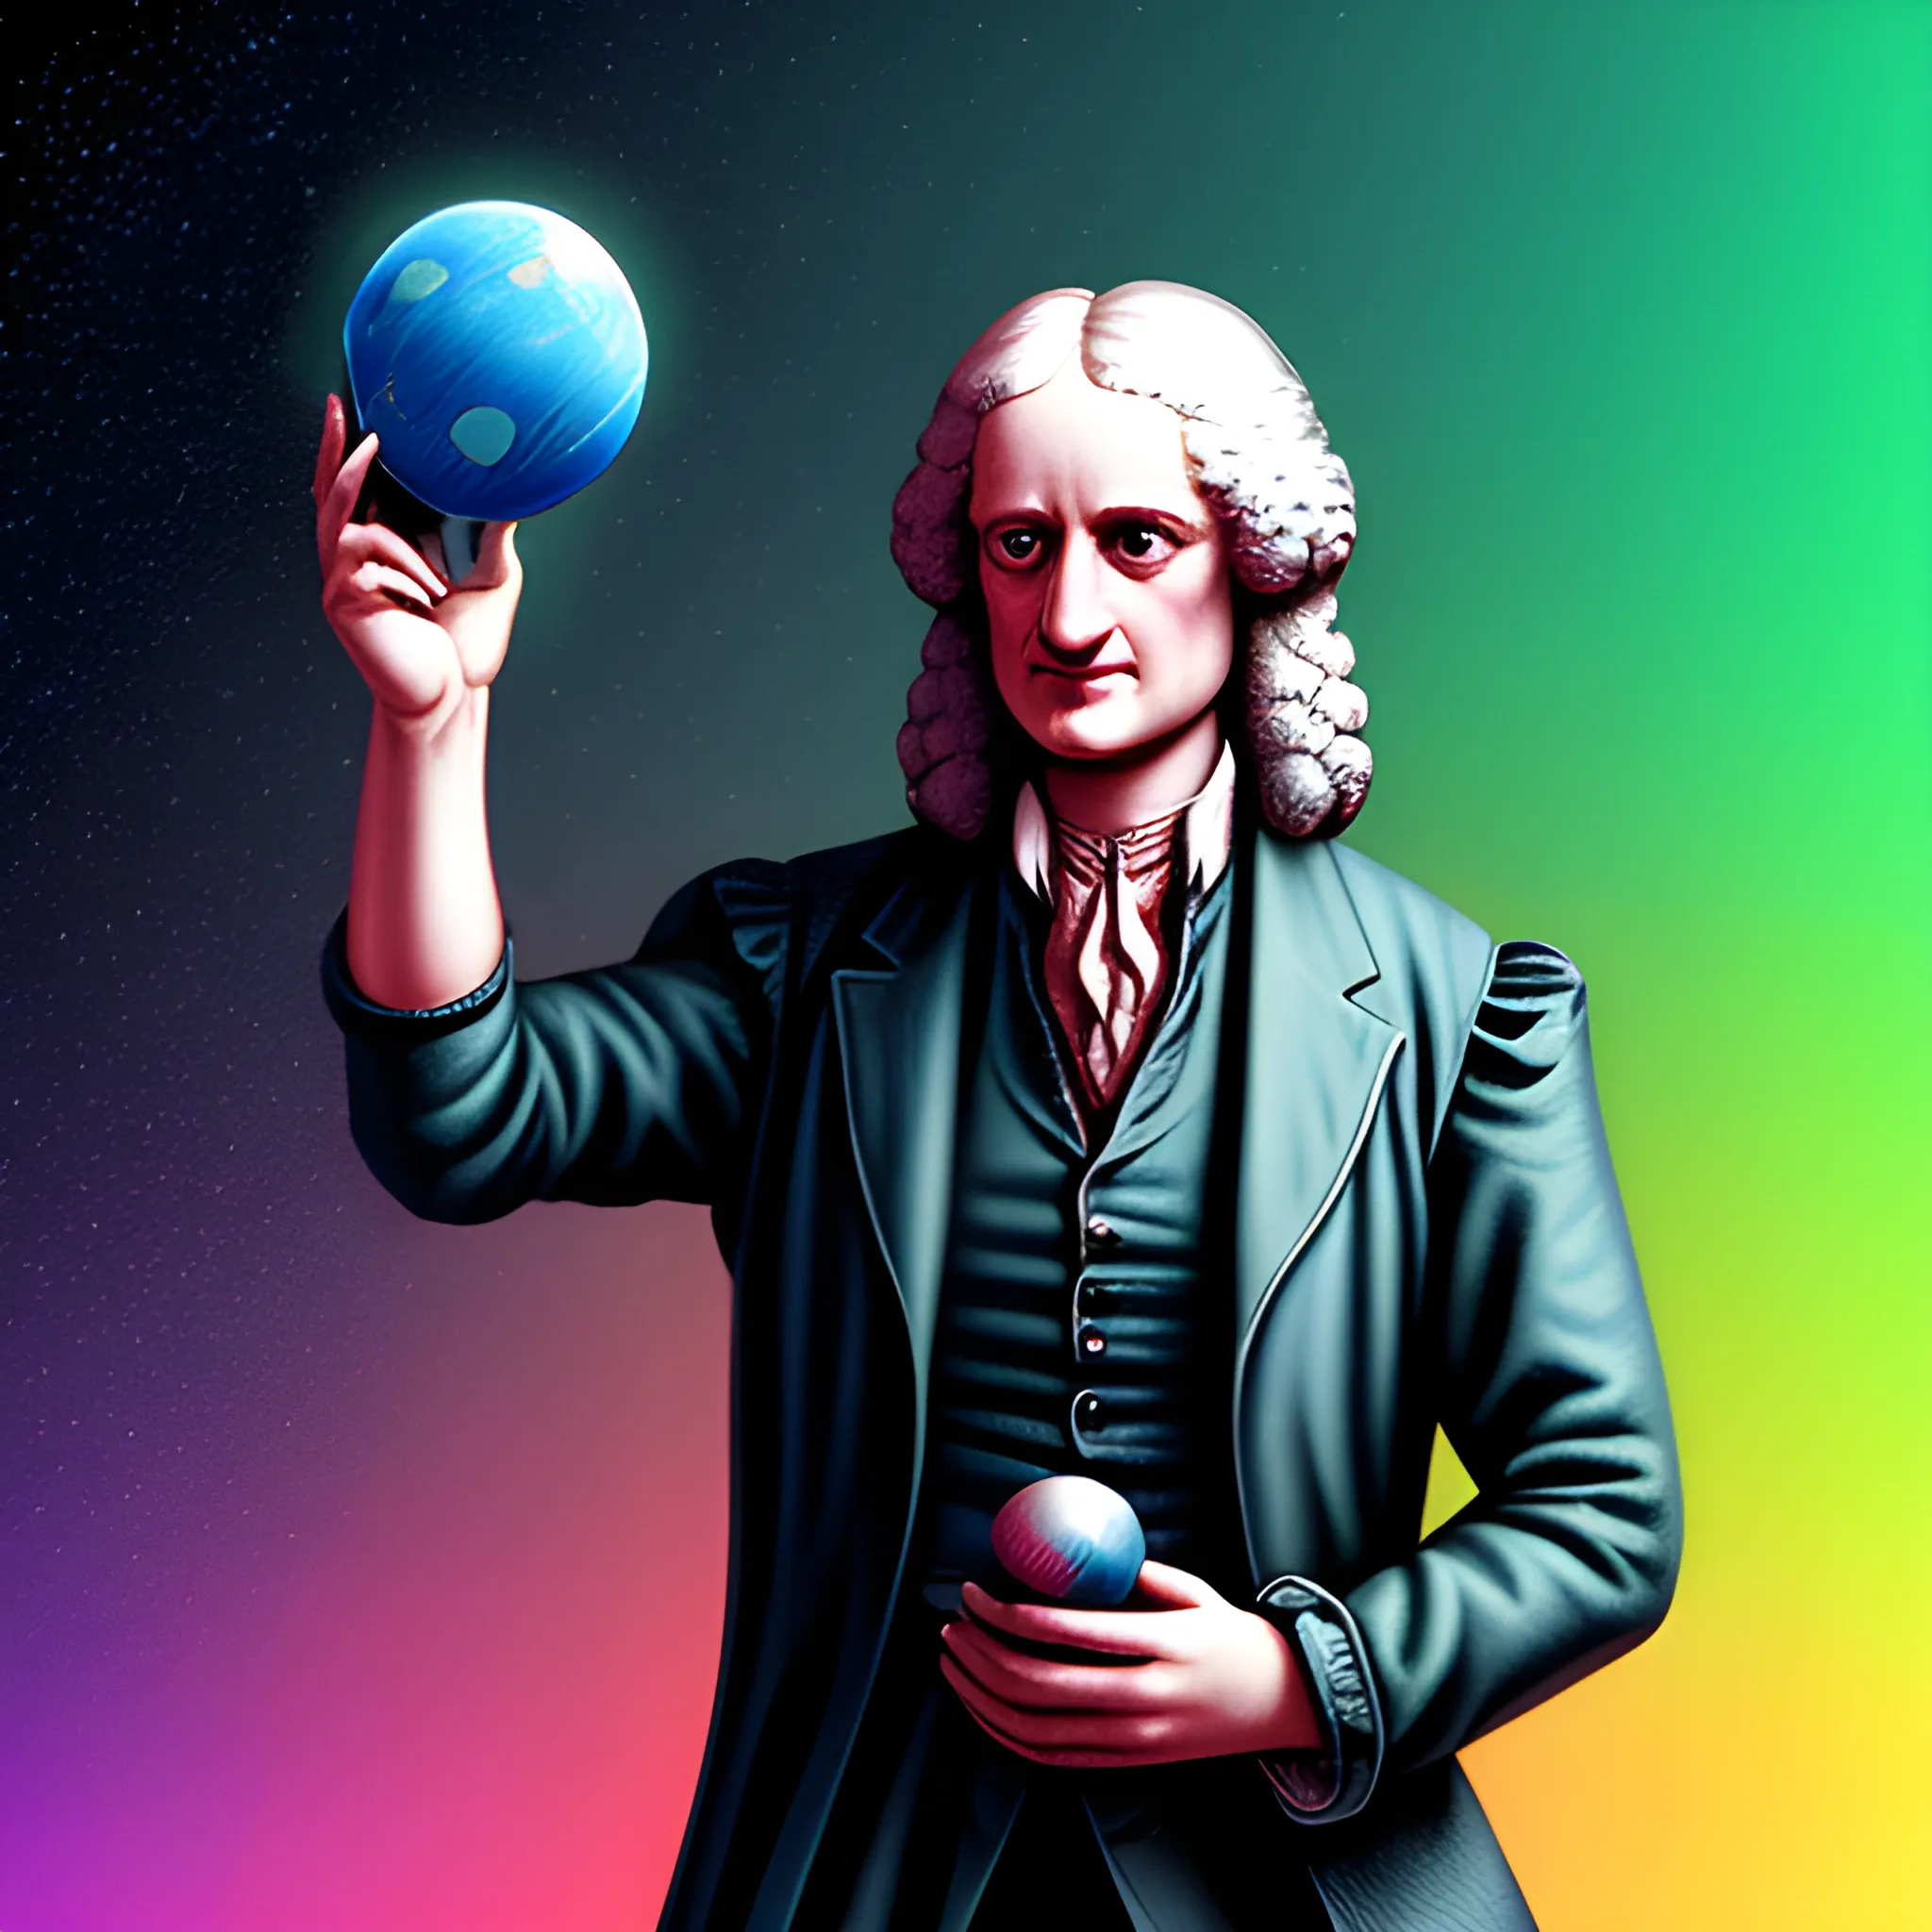 isaac newton holding the world in his palm, make it goofy, cyberpunk, hd, rgb colors, 4k image.